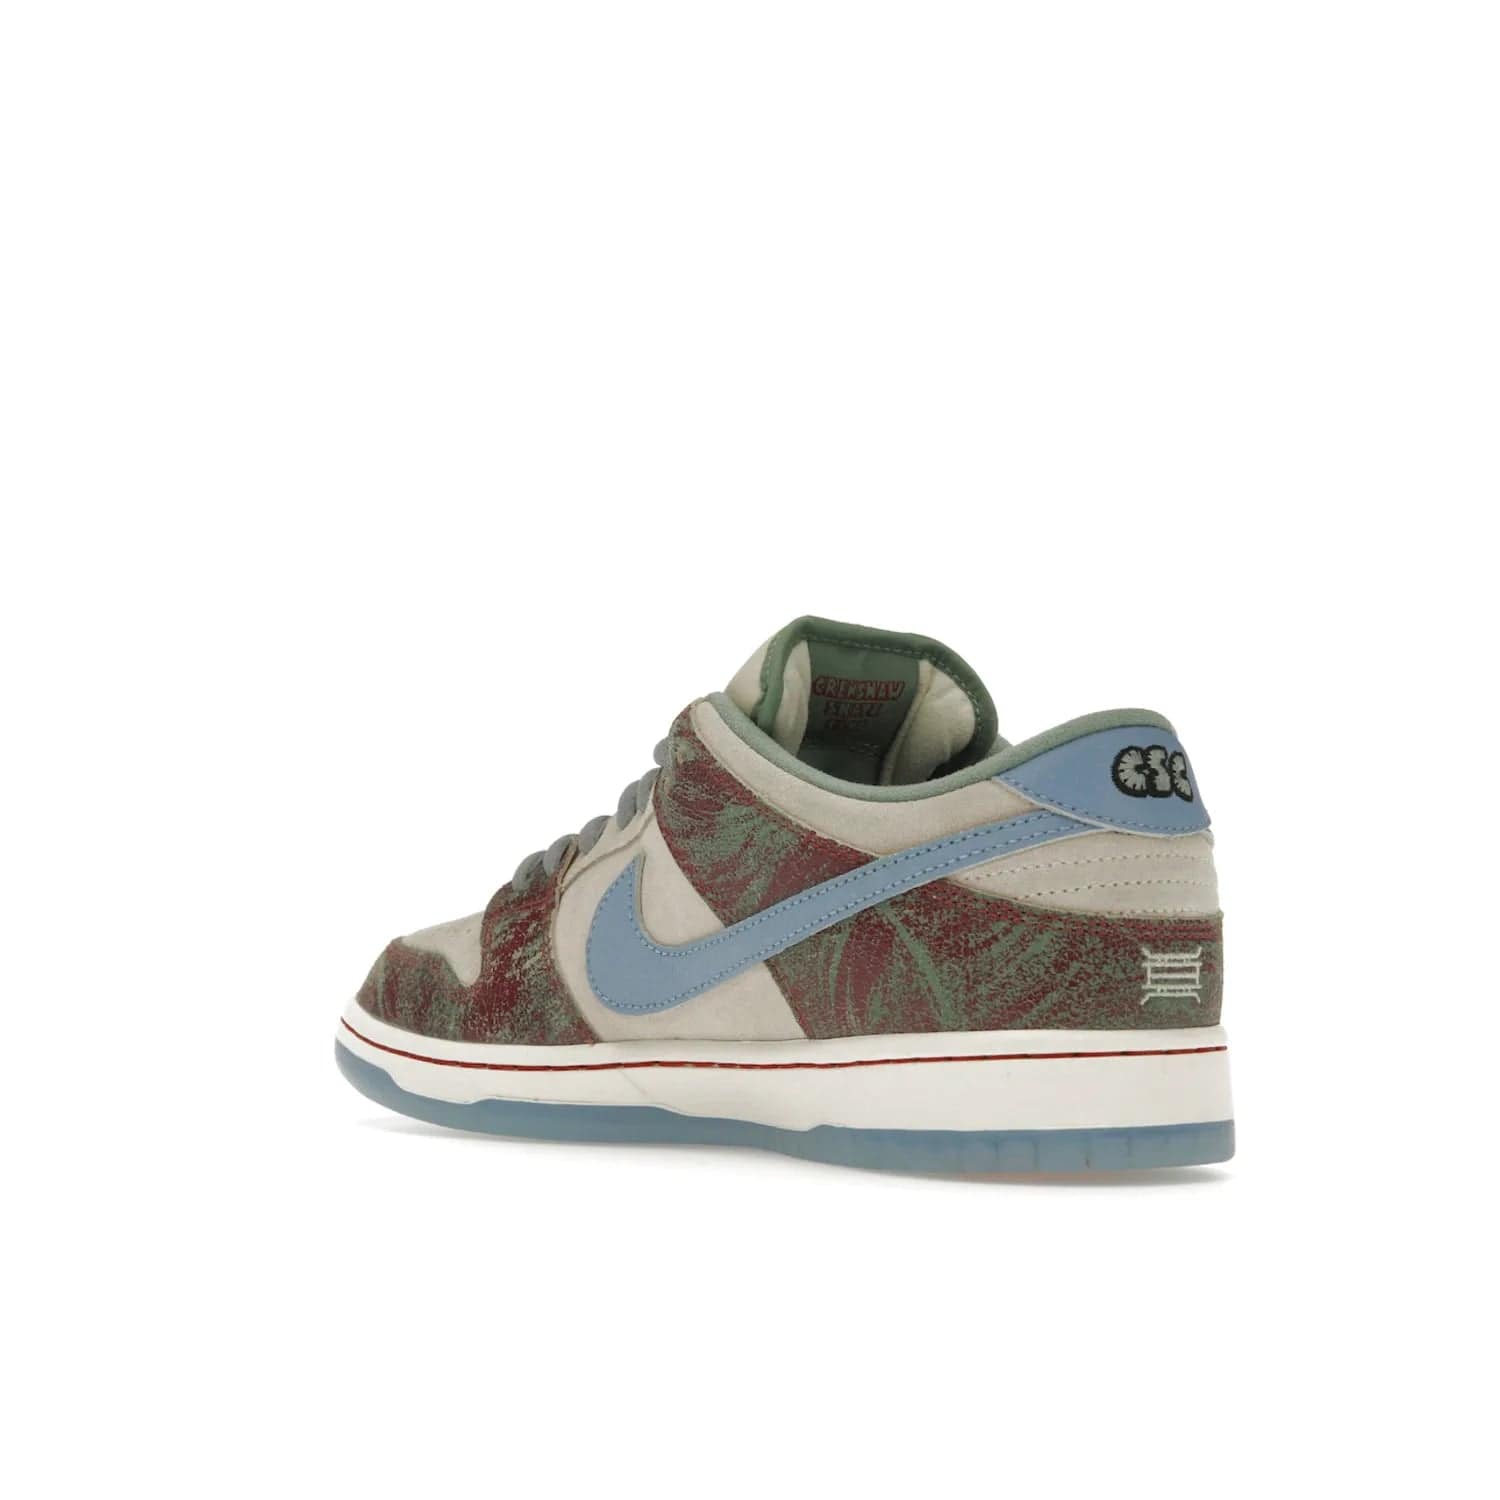 Nike SB Dunk Low Crenshaw Skate Club - Image 24 - Only at www.BallersClubKickz.com - Introducing the Nike SB Dunk Low Crenshaw Skate Club! Classic skate shoes with Sail and Light Blue upper, Cedar accents, padded collars and superior grip for comfortable, stable performance and style. Ideal for any skate session.